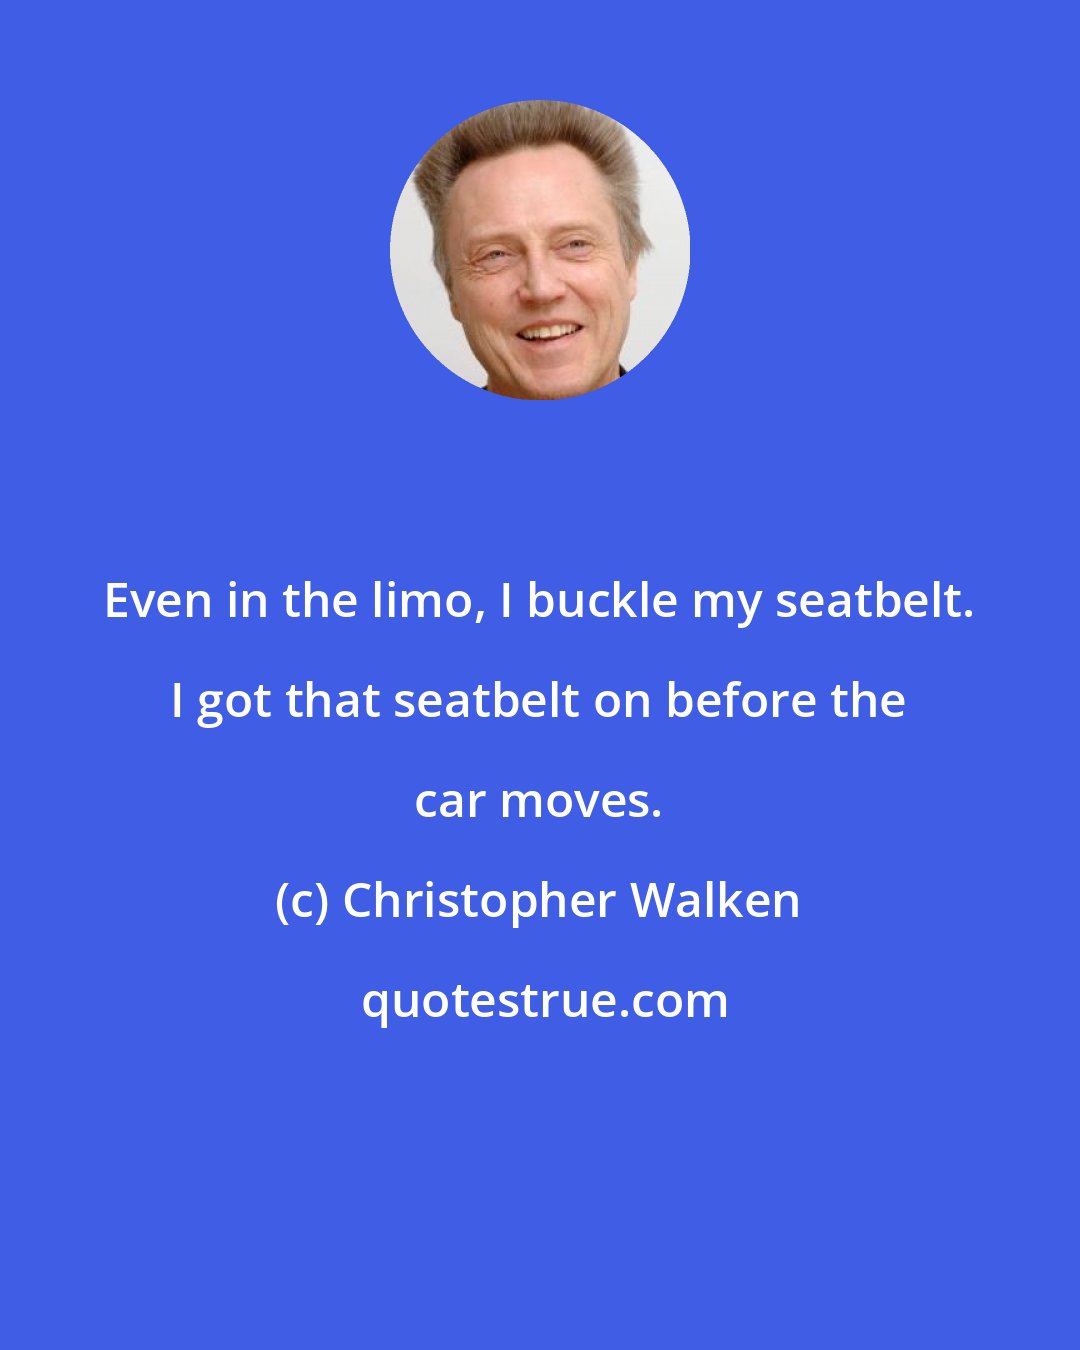 Christopher Walken: Even in the limo, I buckle my seatbelt. I got that seatbelt on before the car moves.